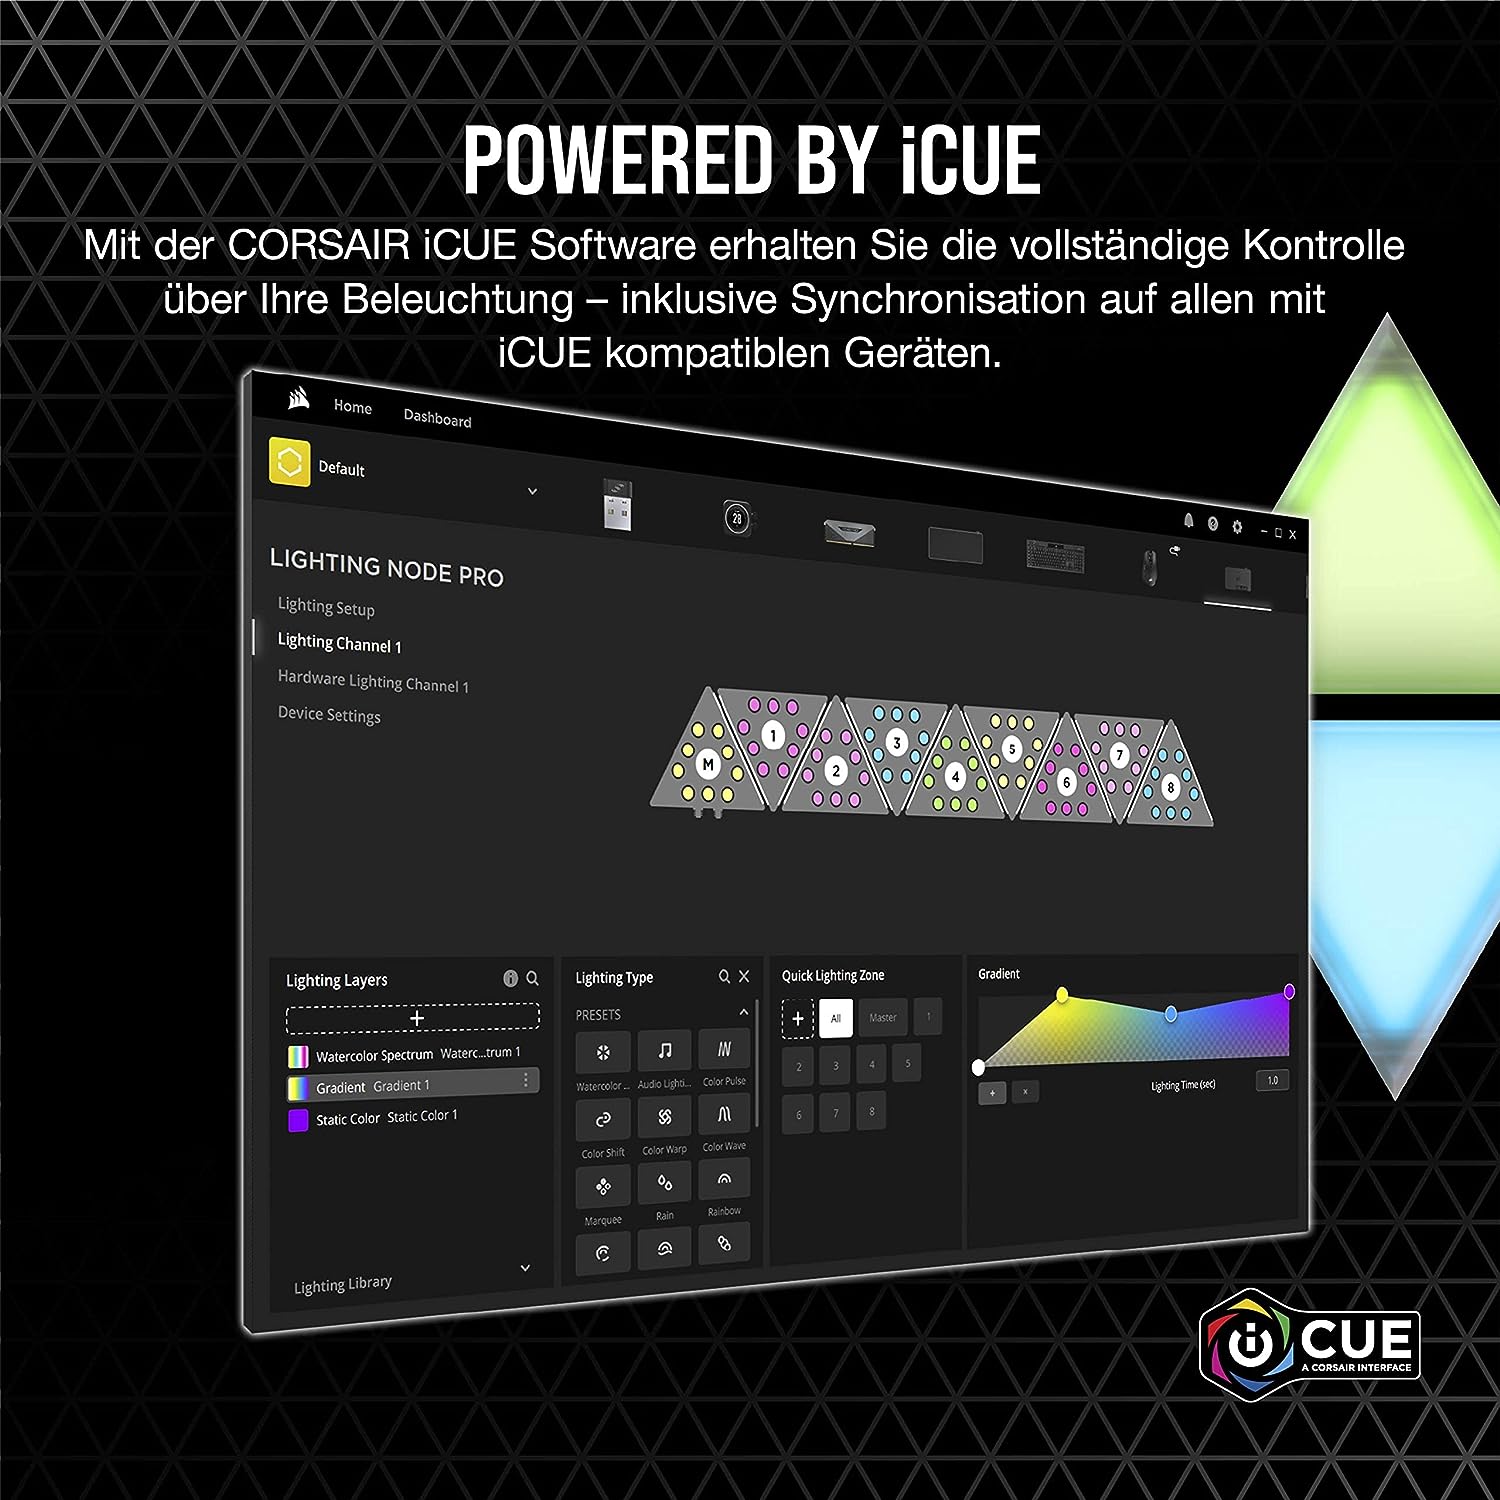 Corsair iCUE LC100 Housing Concentrated Lighting Elements – Mini Triangles – 9 x Tile Expansion Kit Review